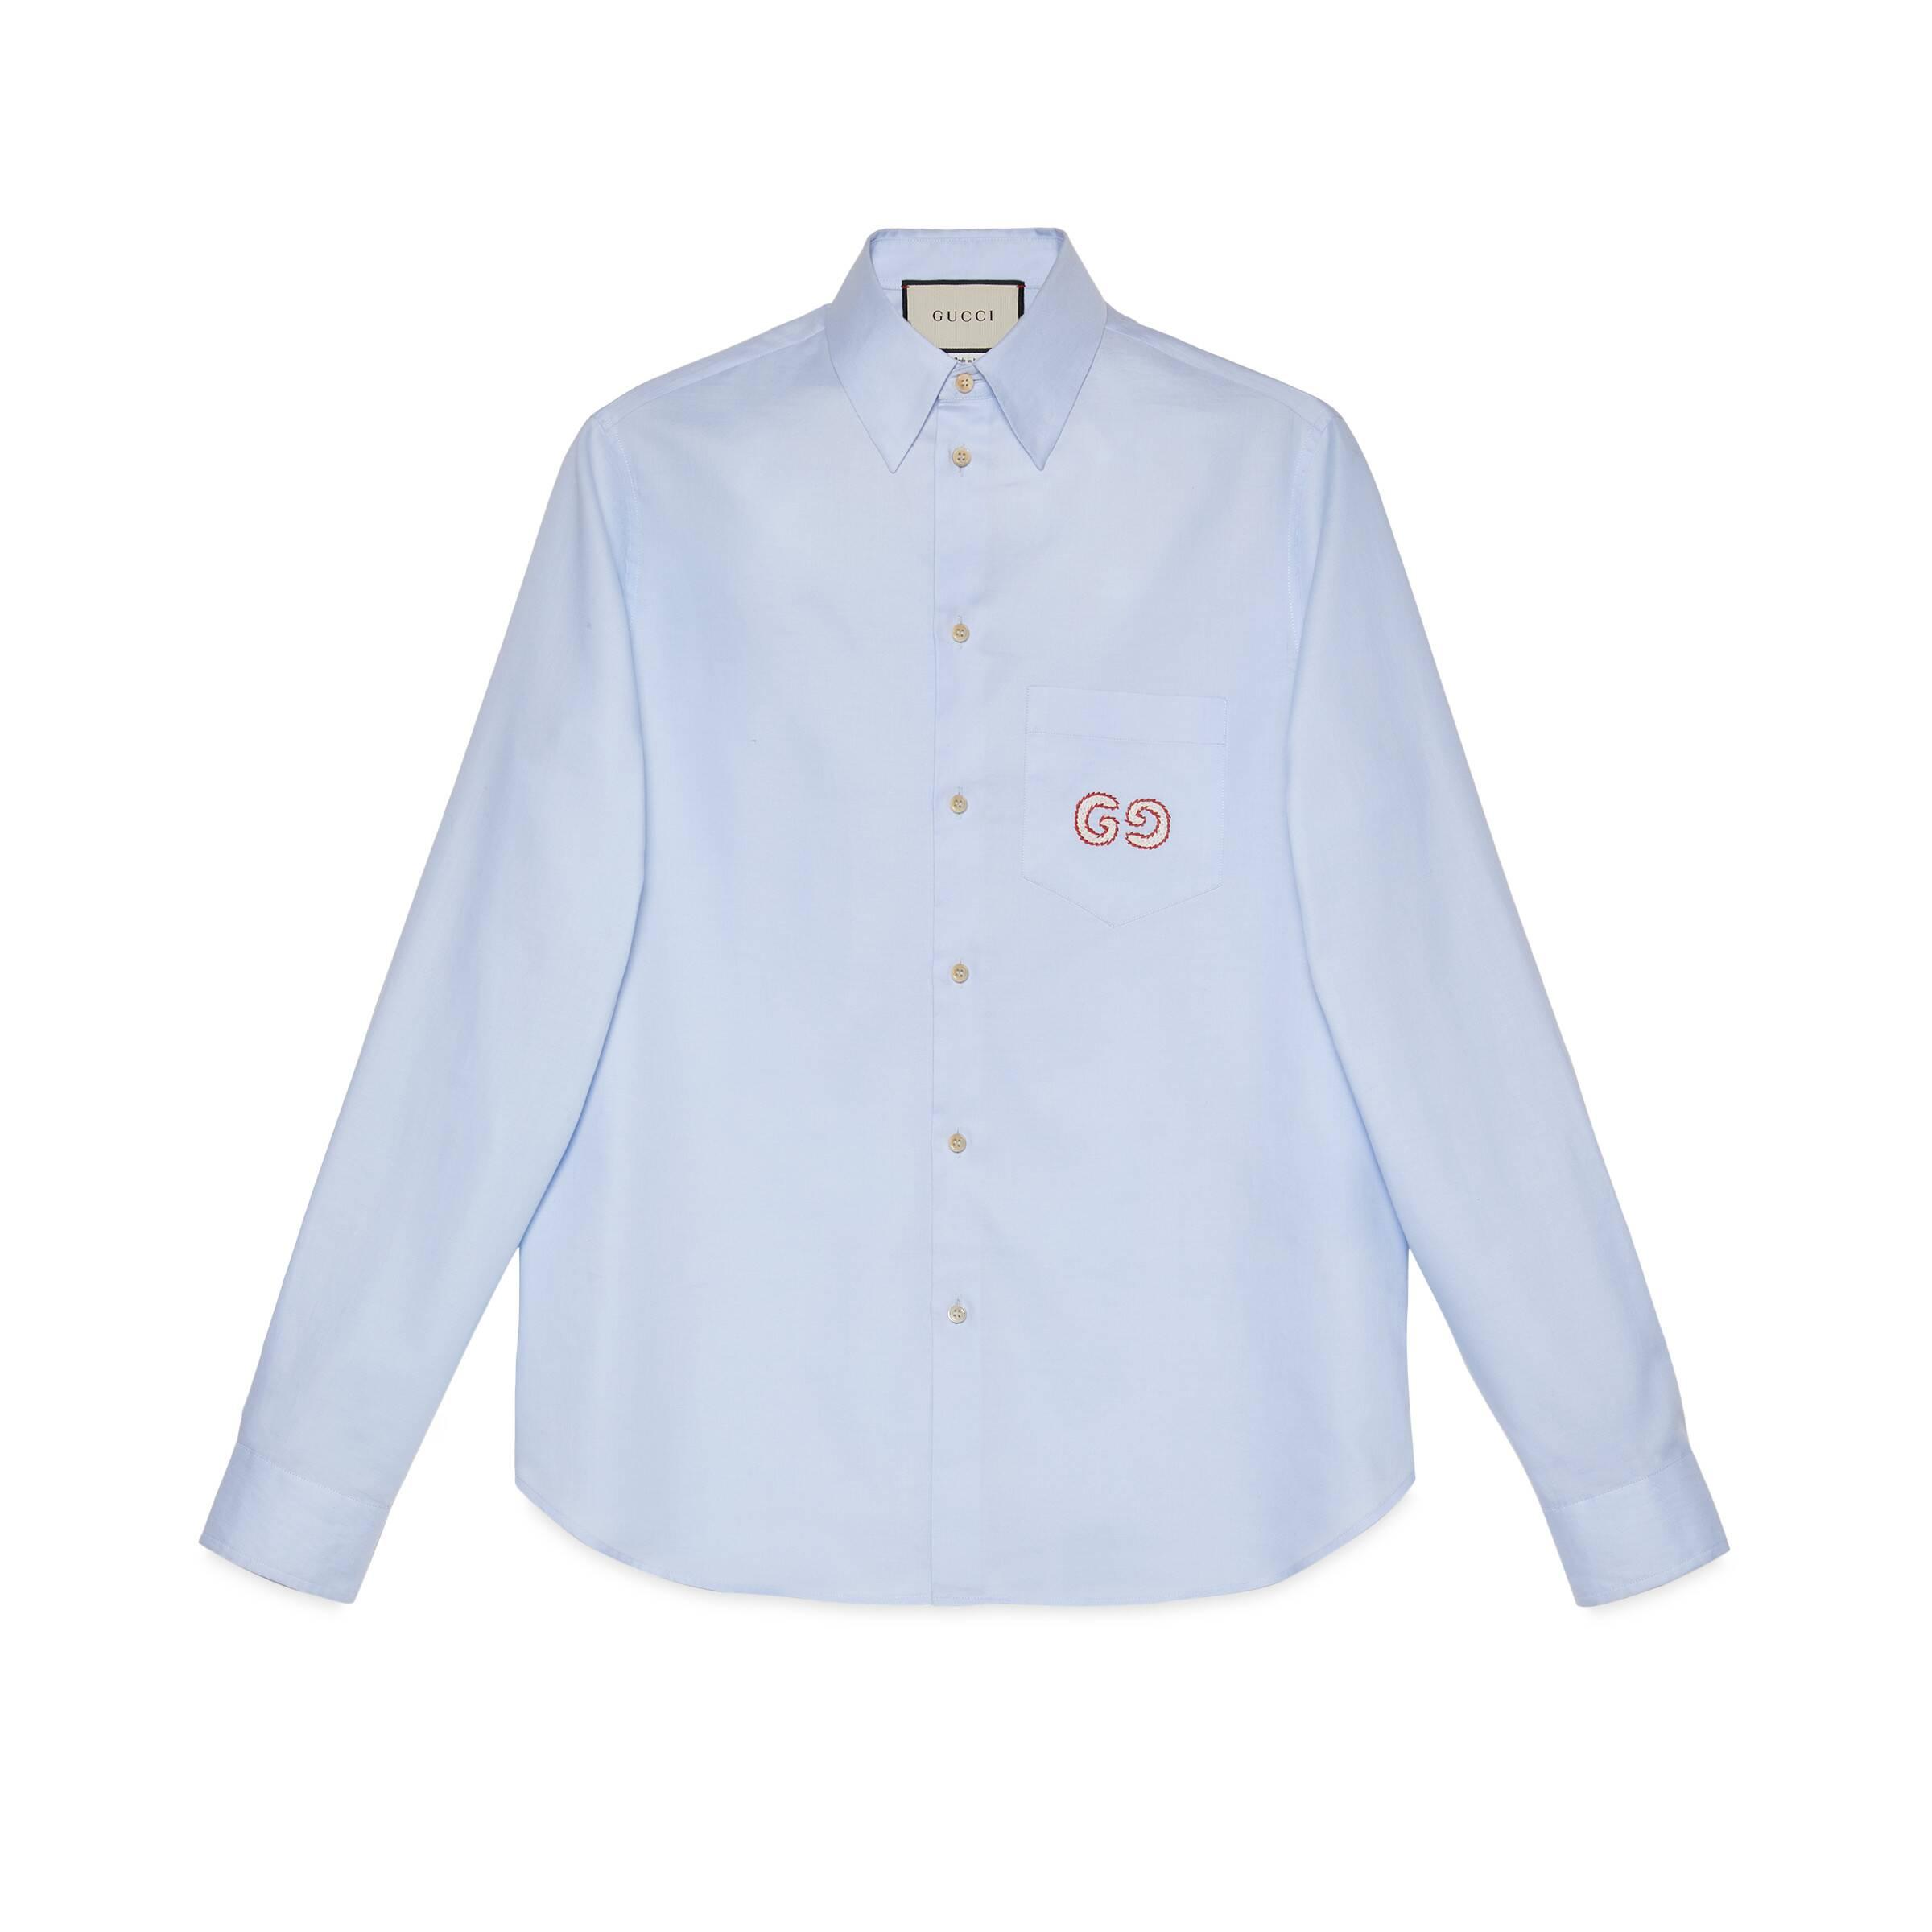 Gucci Oxford Cotton Shirt With GG in Light Blue (Blue) for Men - Save ...